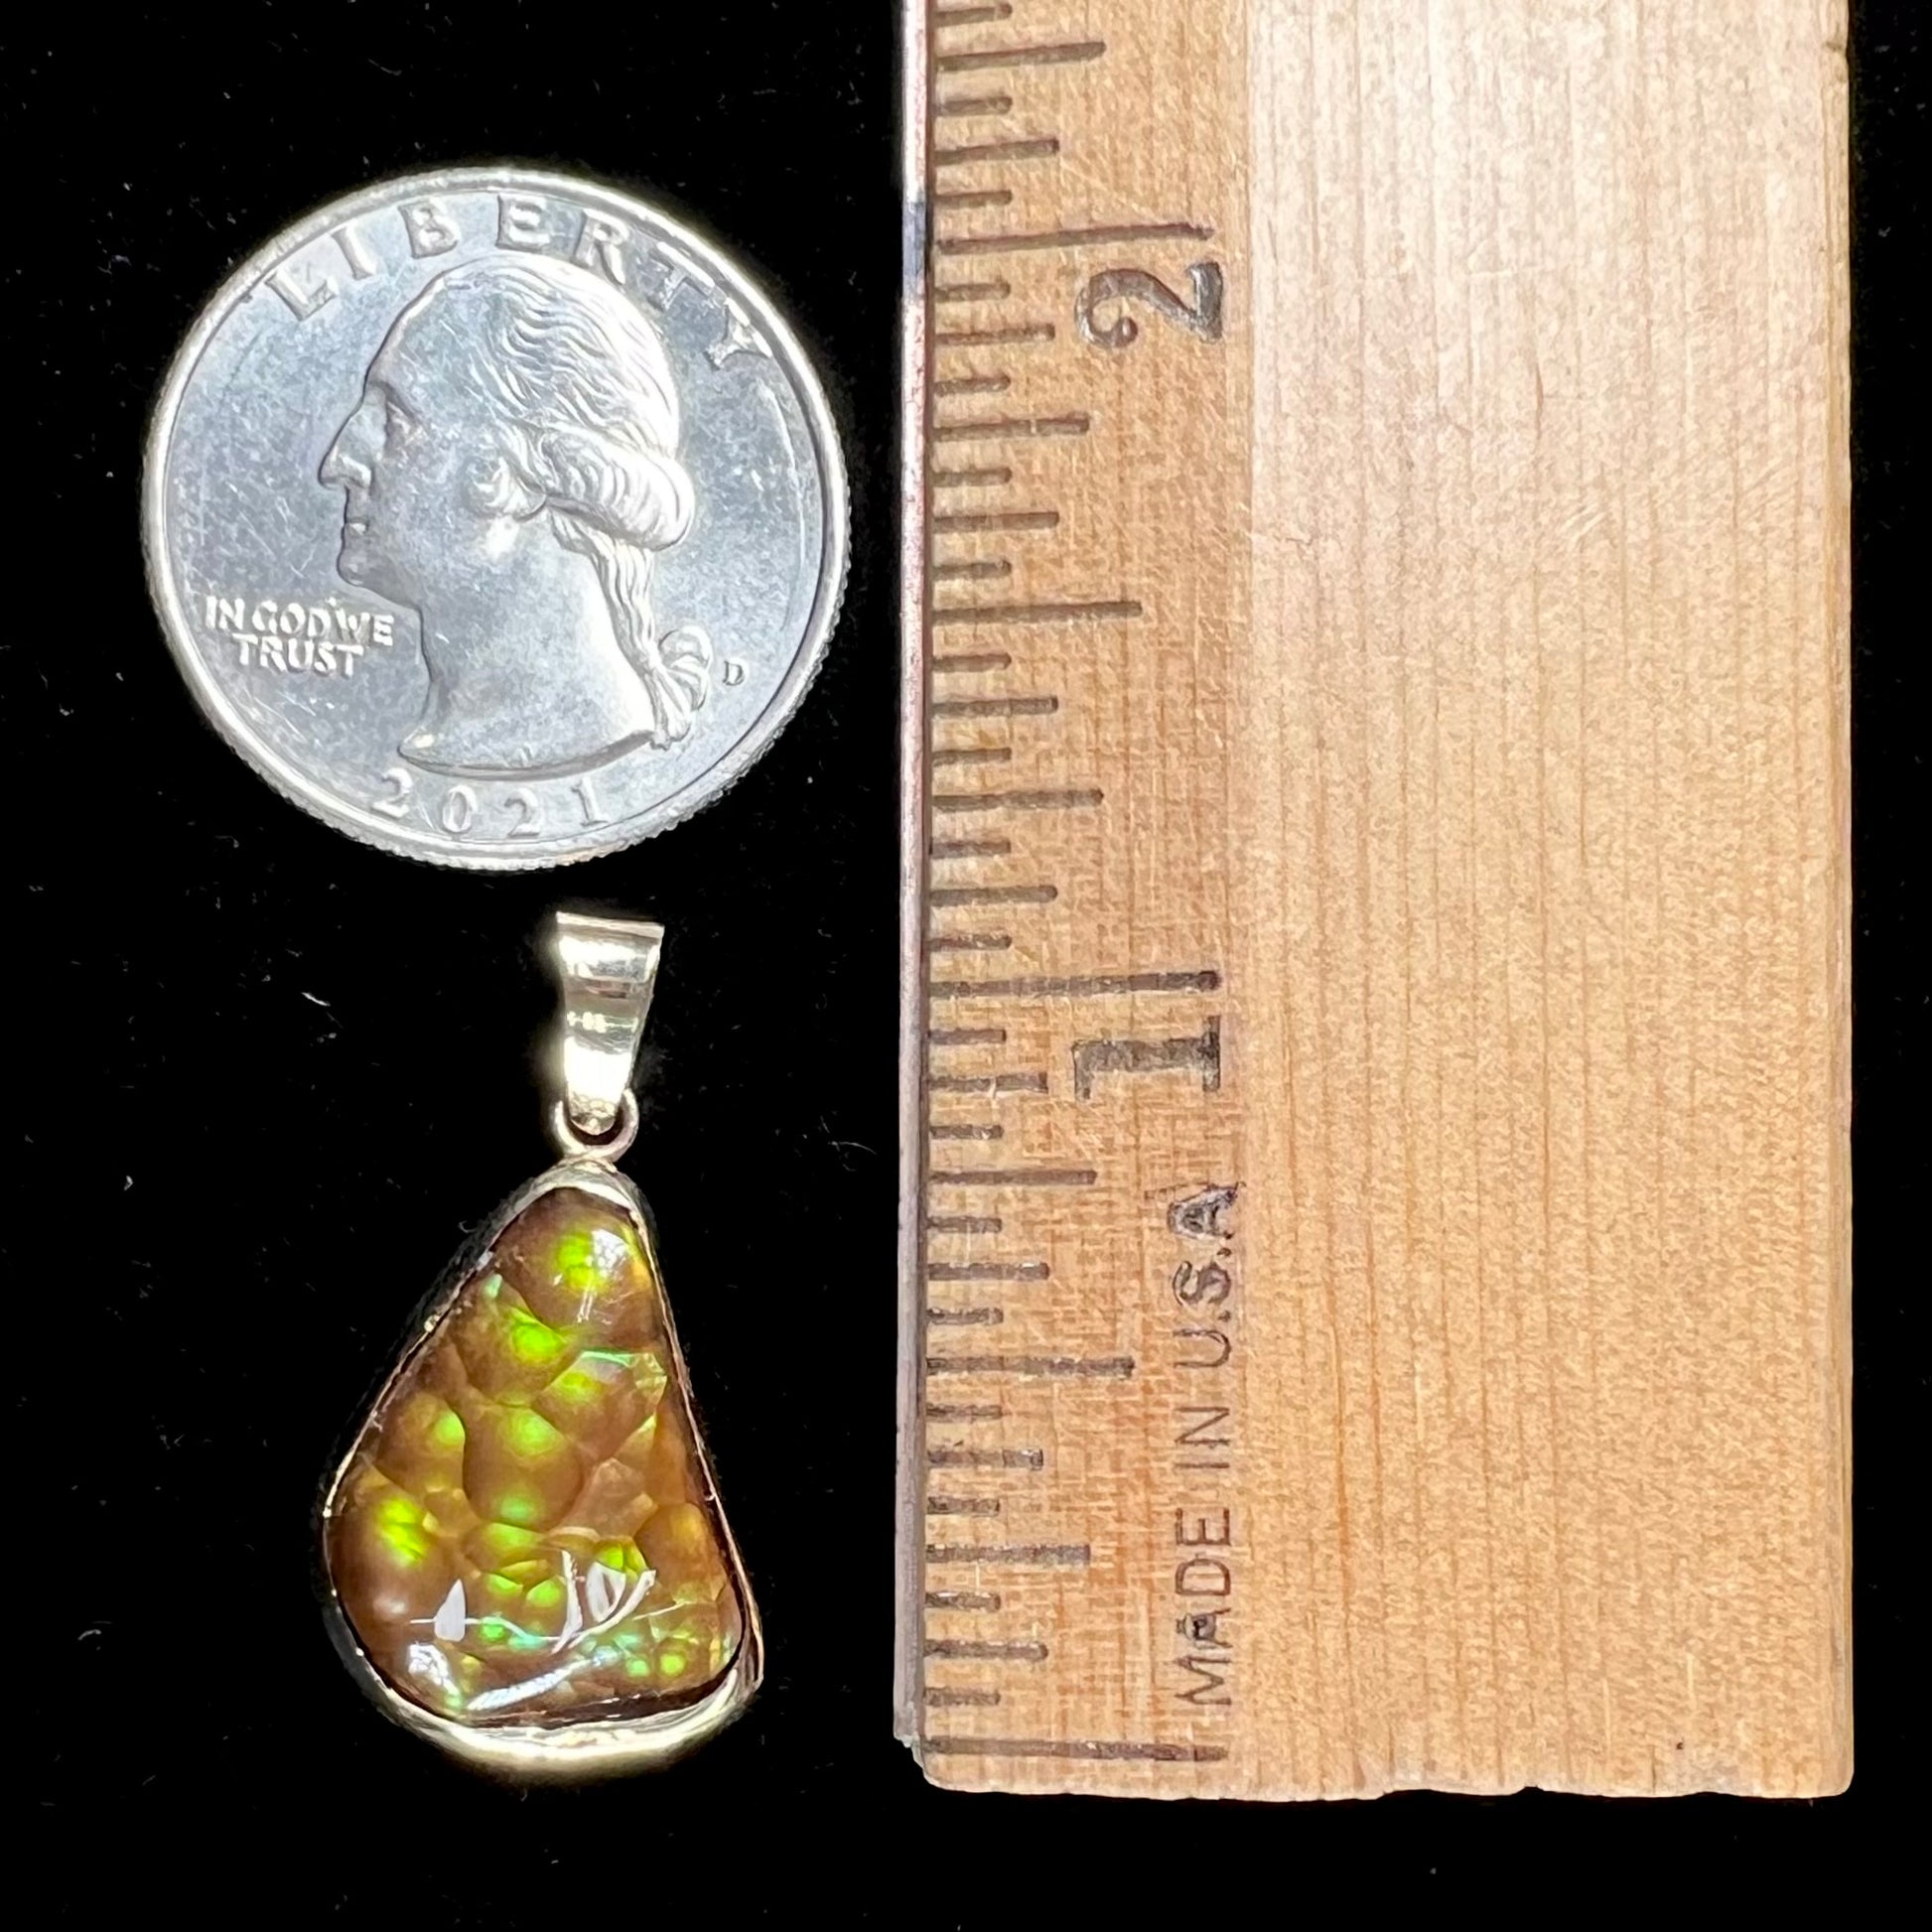 A handmade yellow gold solitaire pendant set with a green fire agate stone from Mexico.